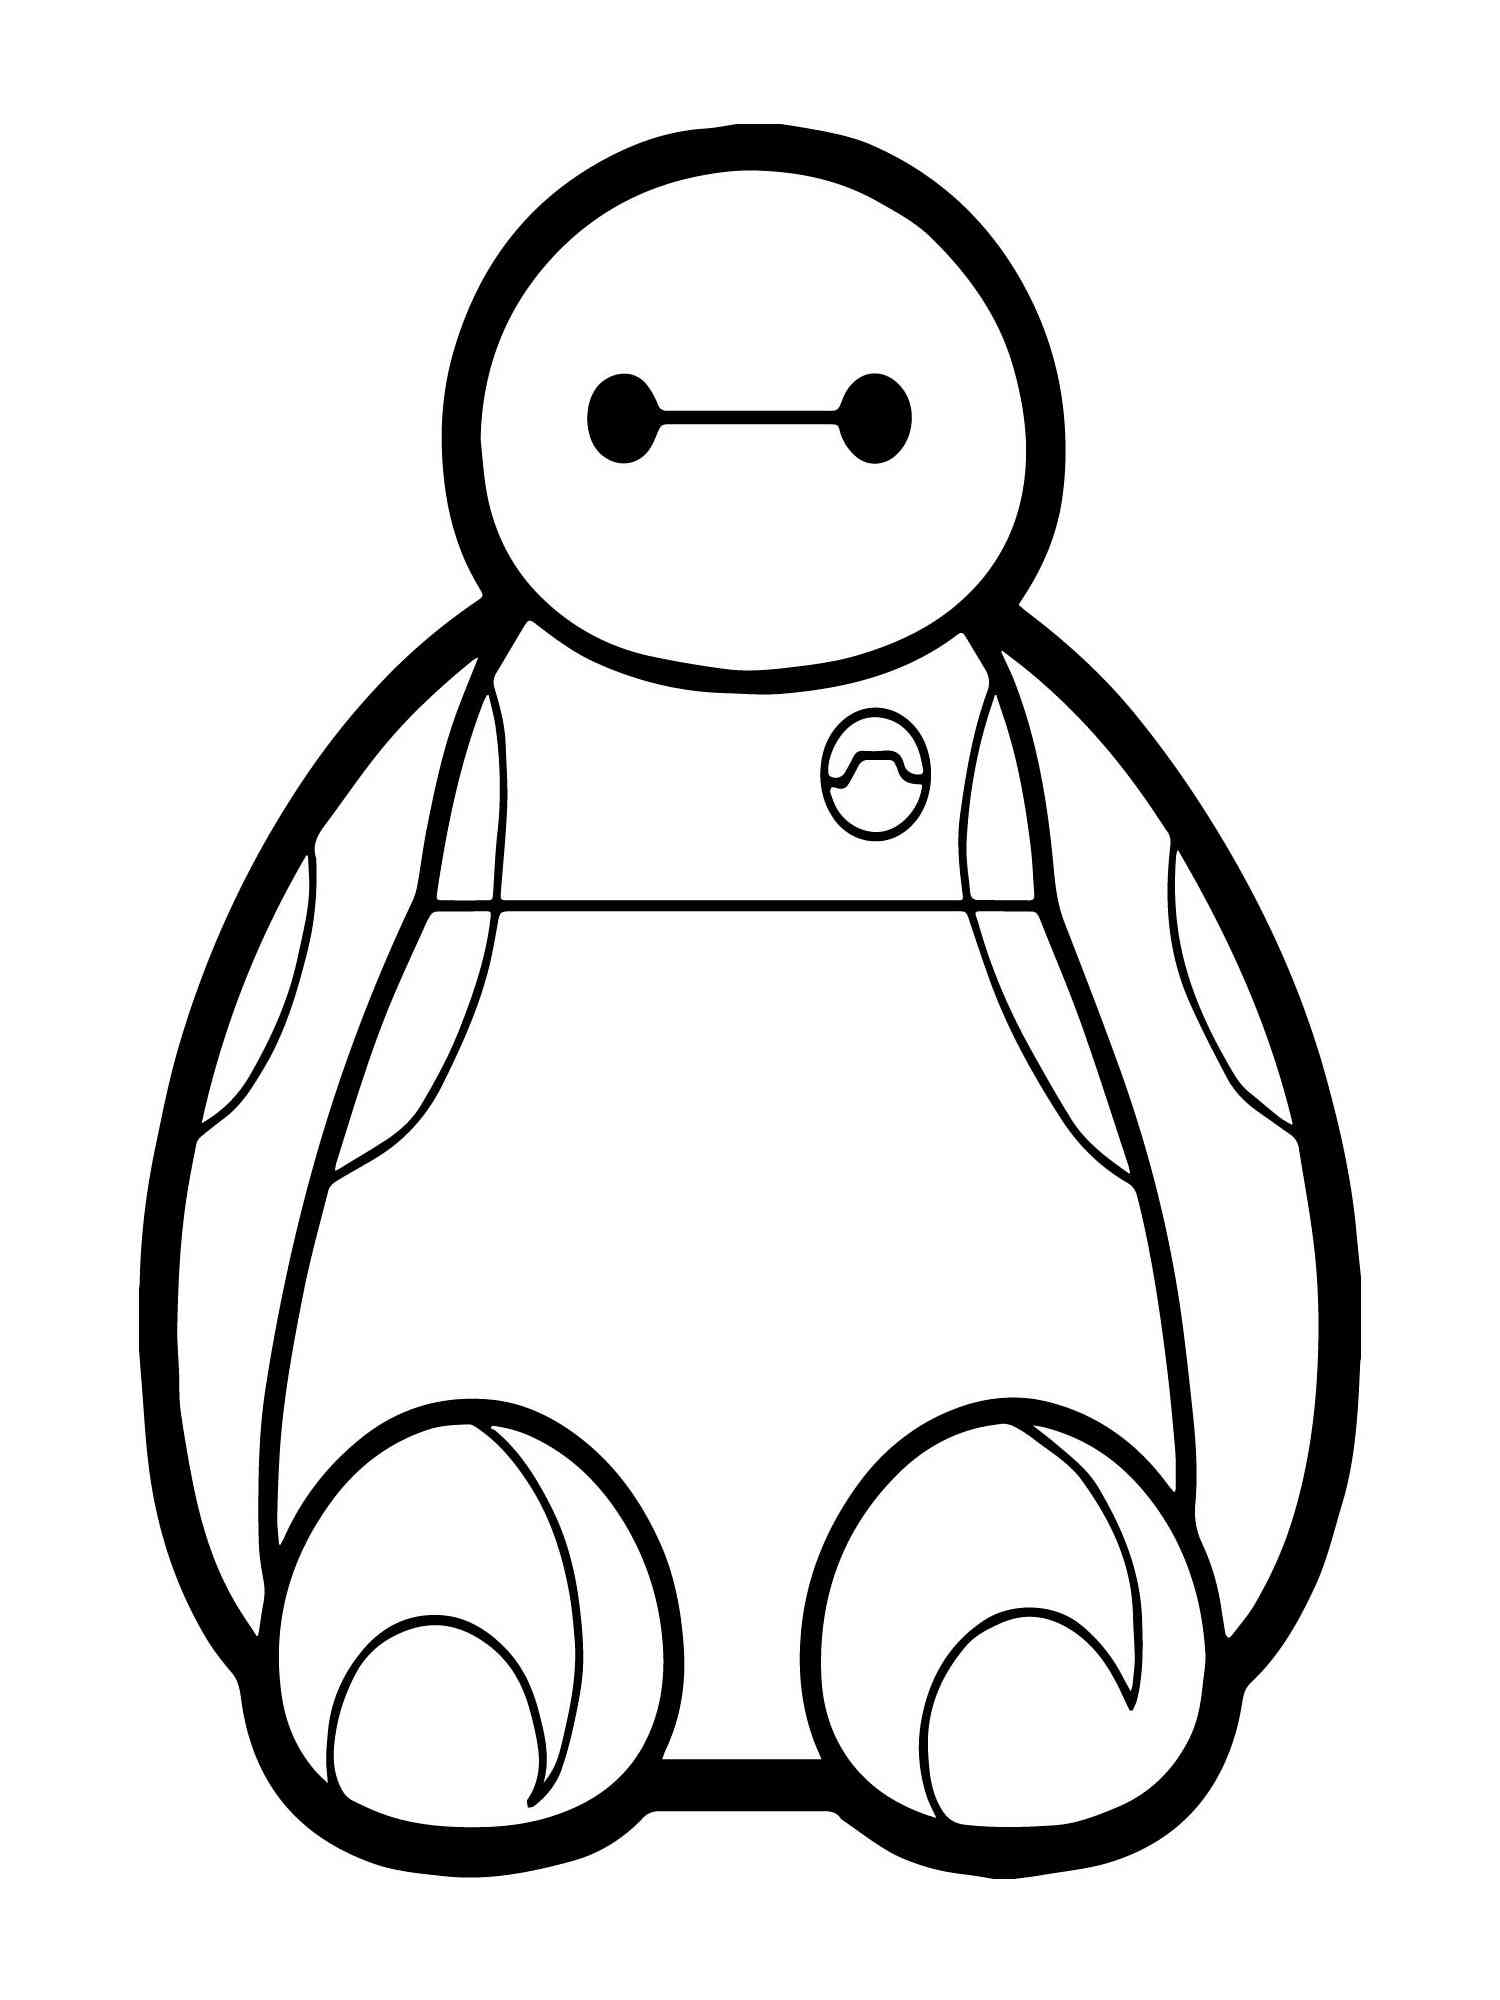 Little Baymax coloring page